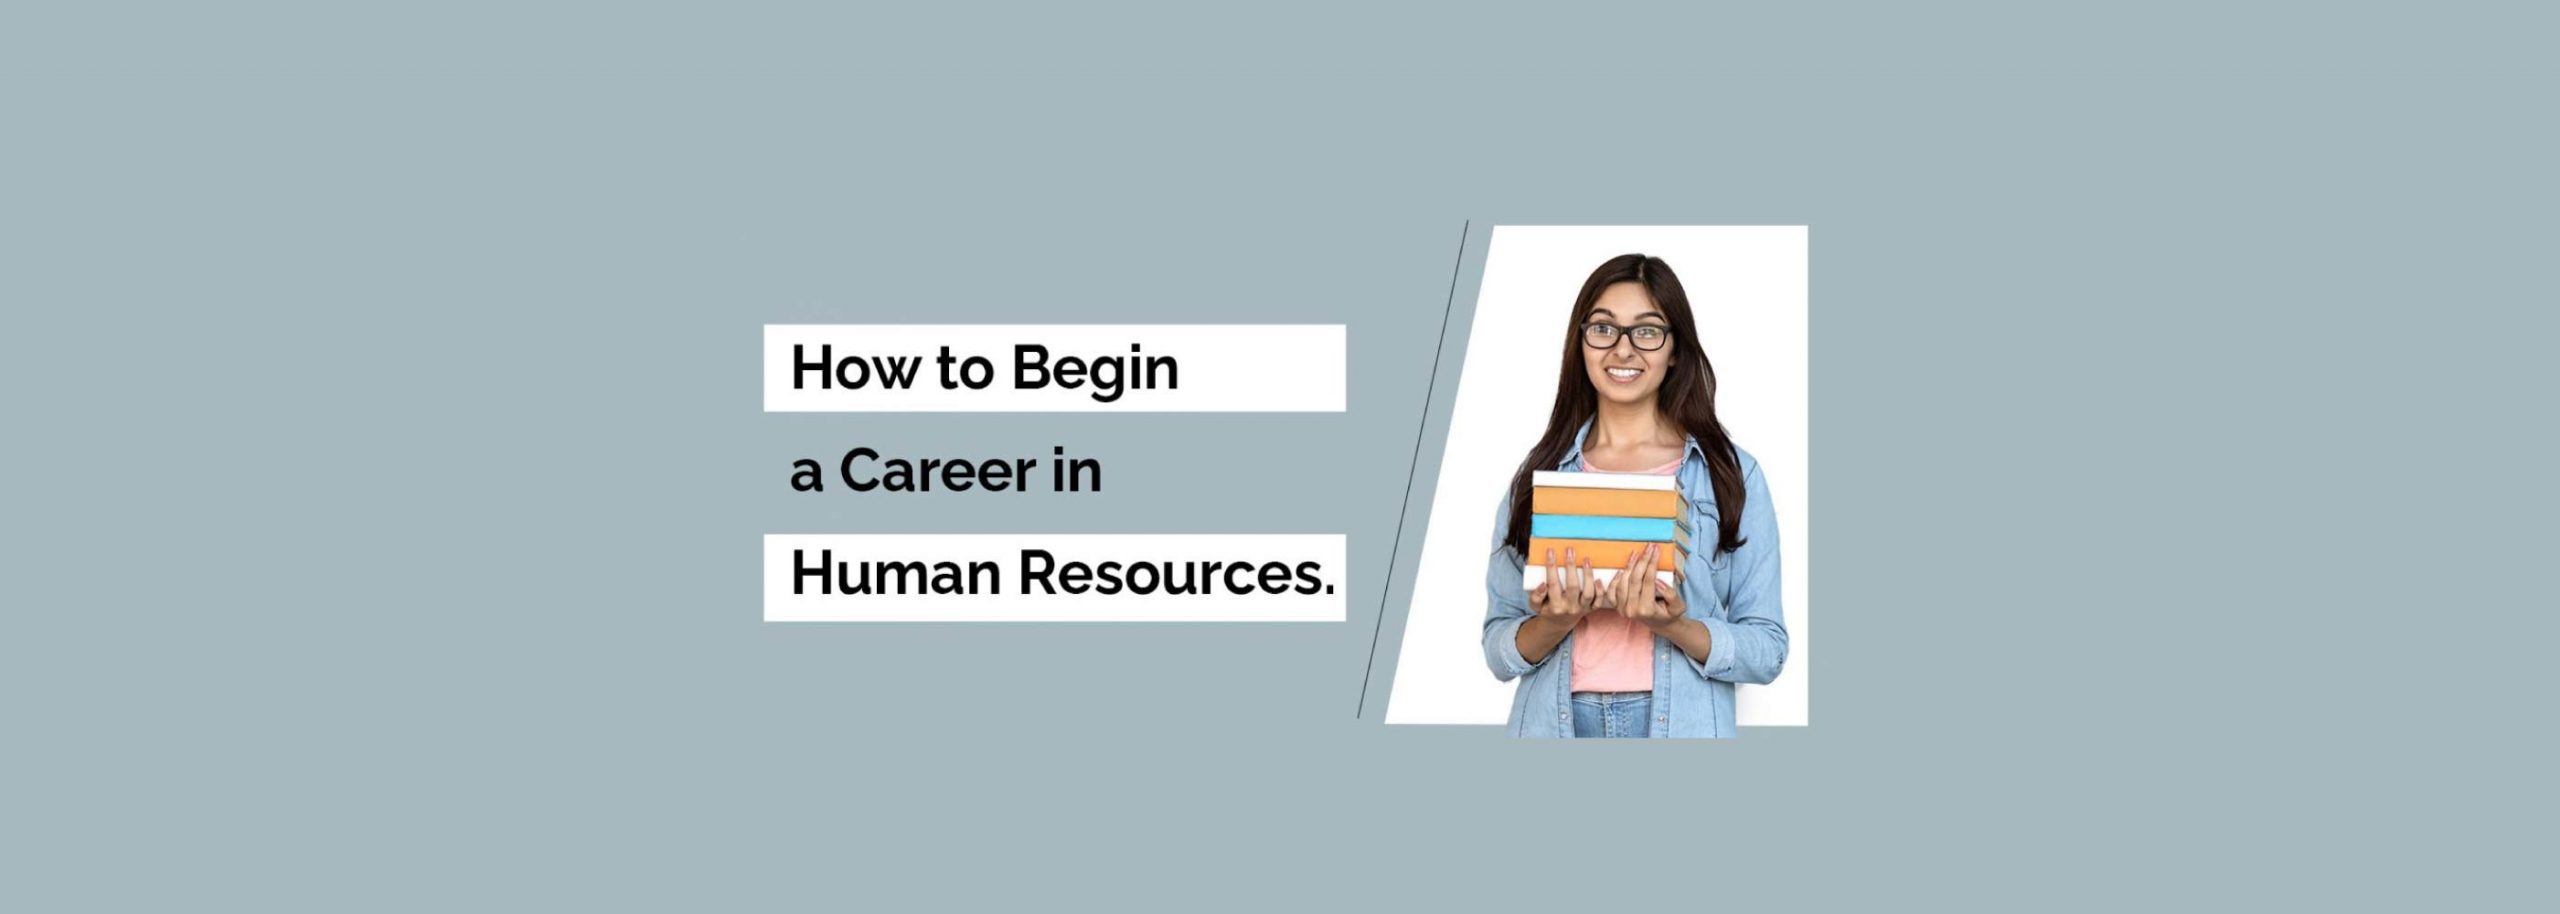 career in human resources